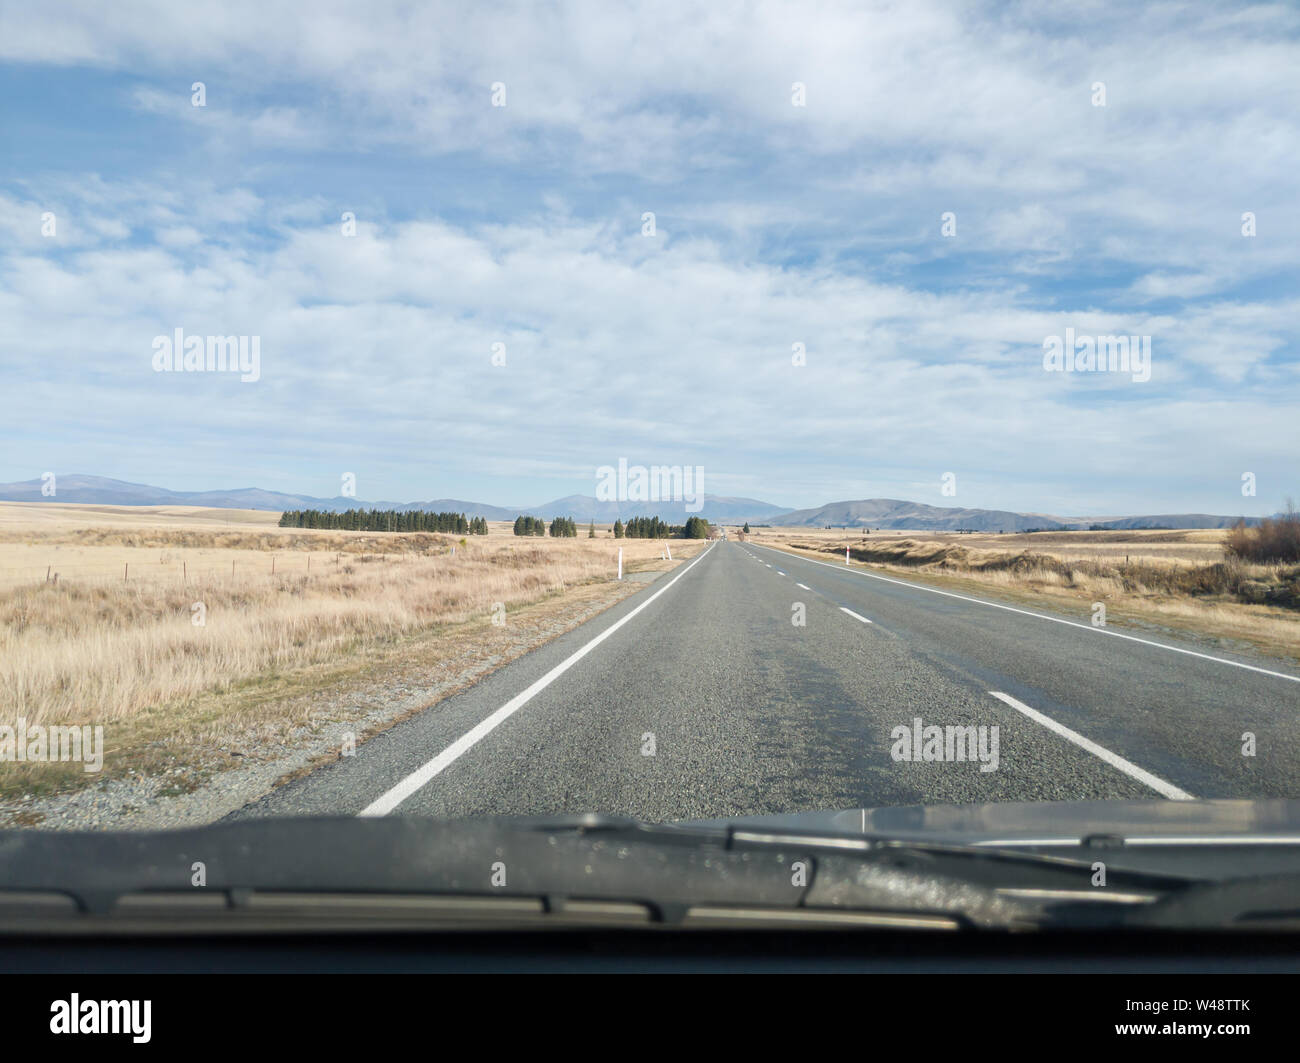 View from the car, Southern Alps mountain range on the road in New Zealand Stock Photo